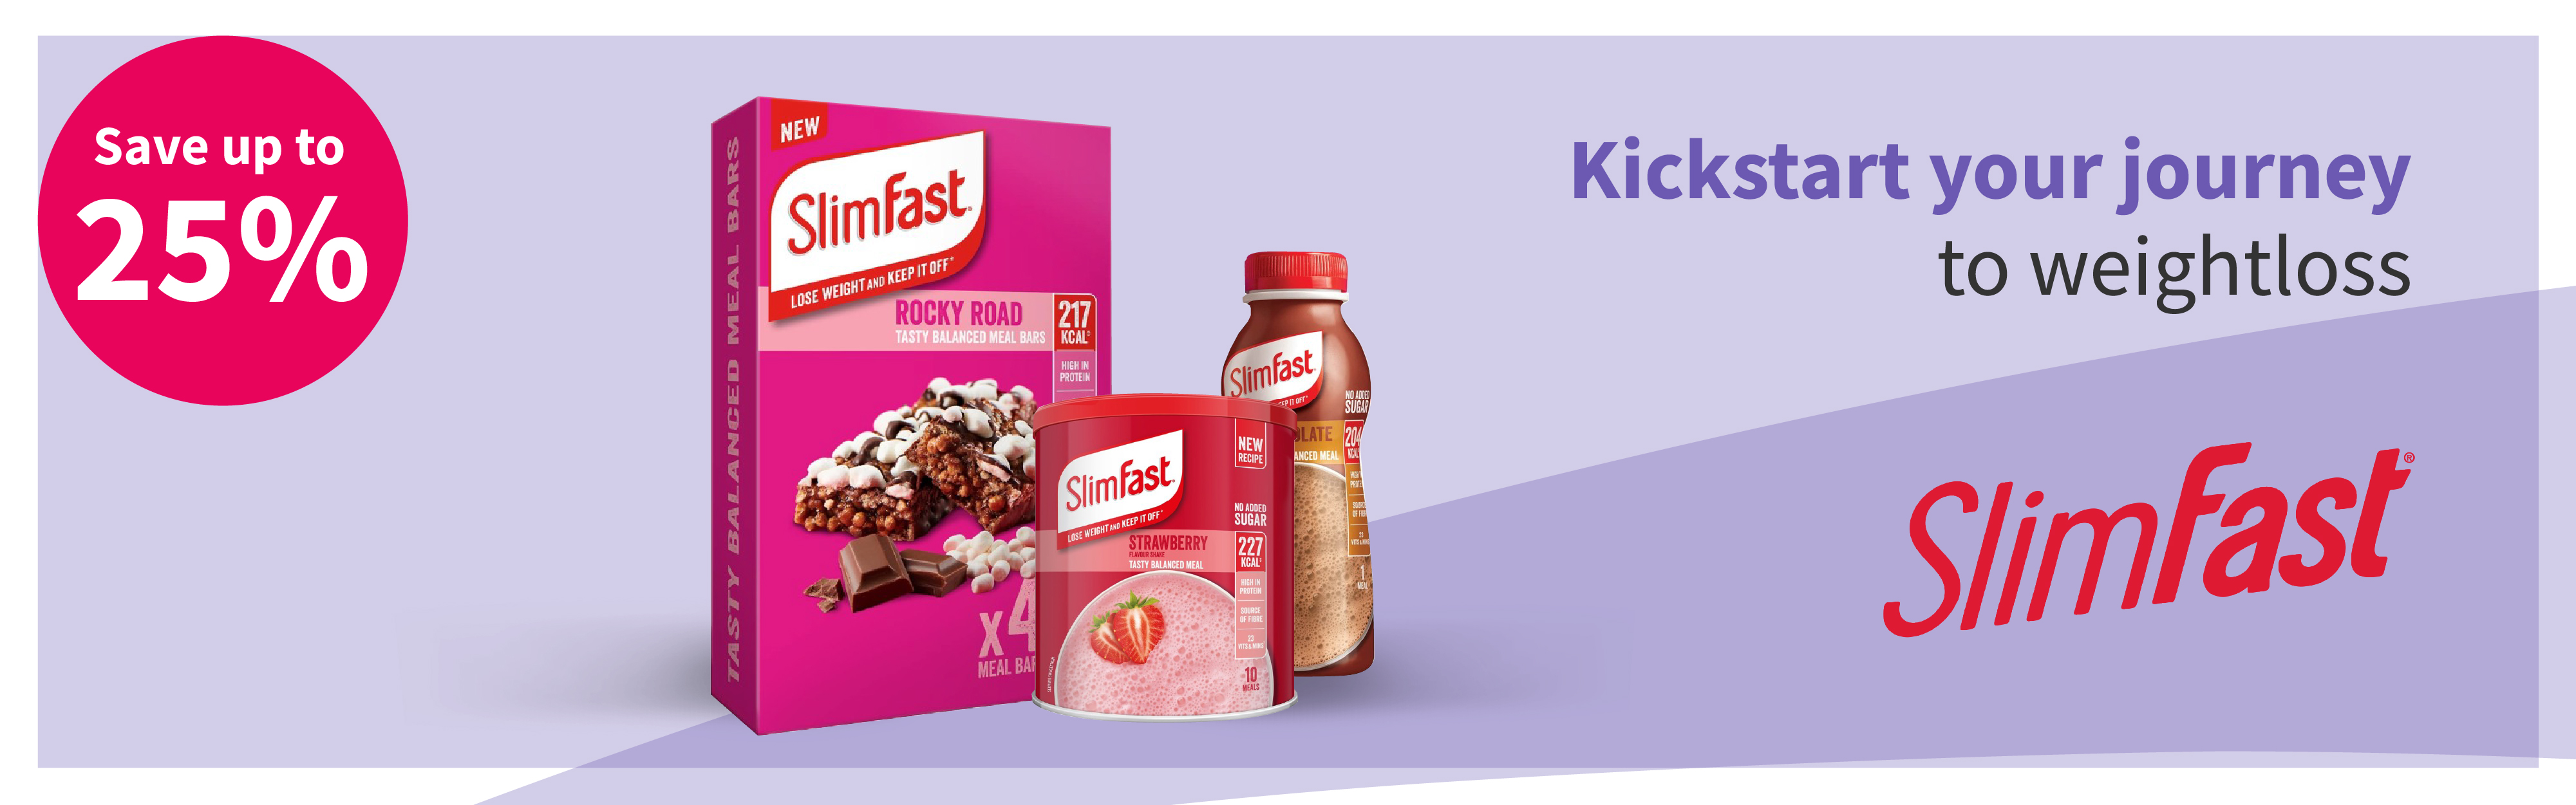 SlimFast: Save up to 25%